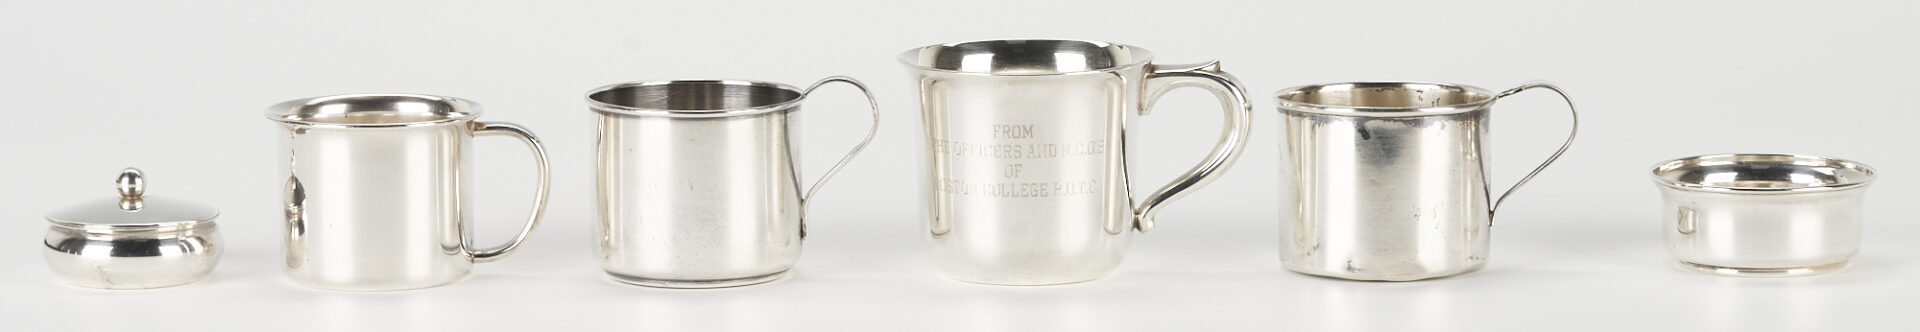 Lot 939: 26 Assembled Sterling Silver Holloware Items, incl. Sherbet Cups